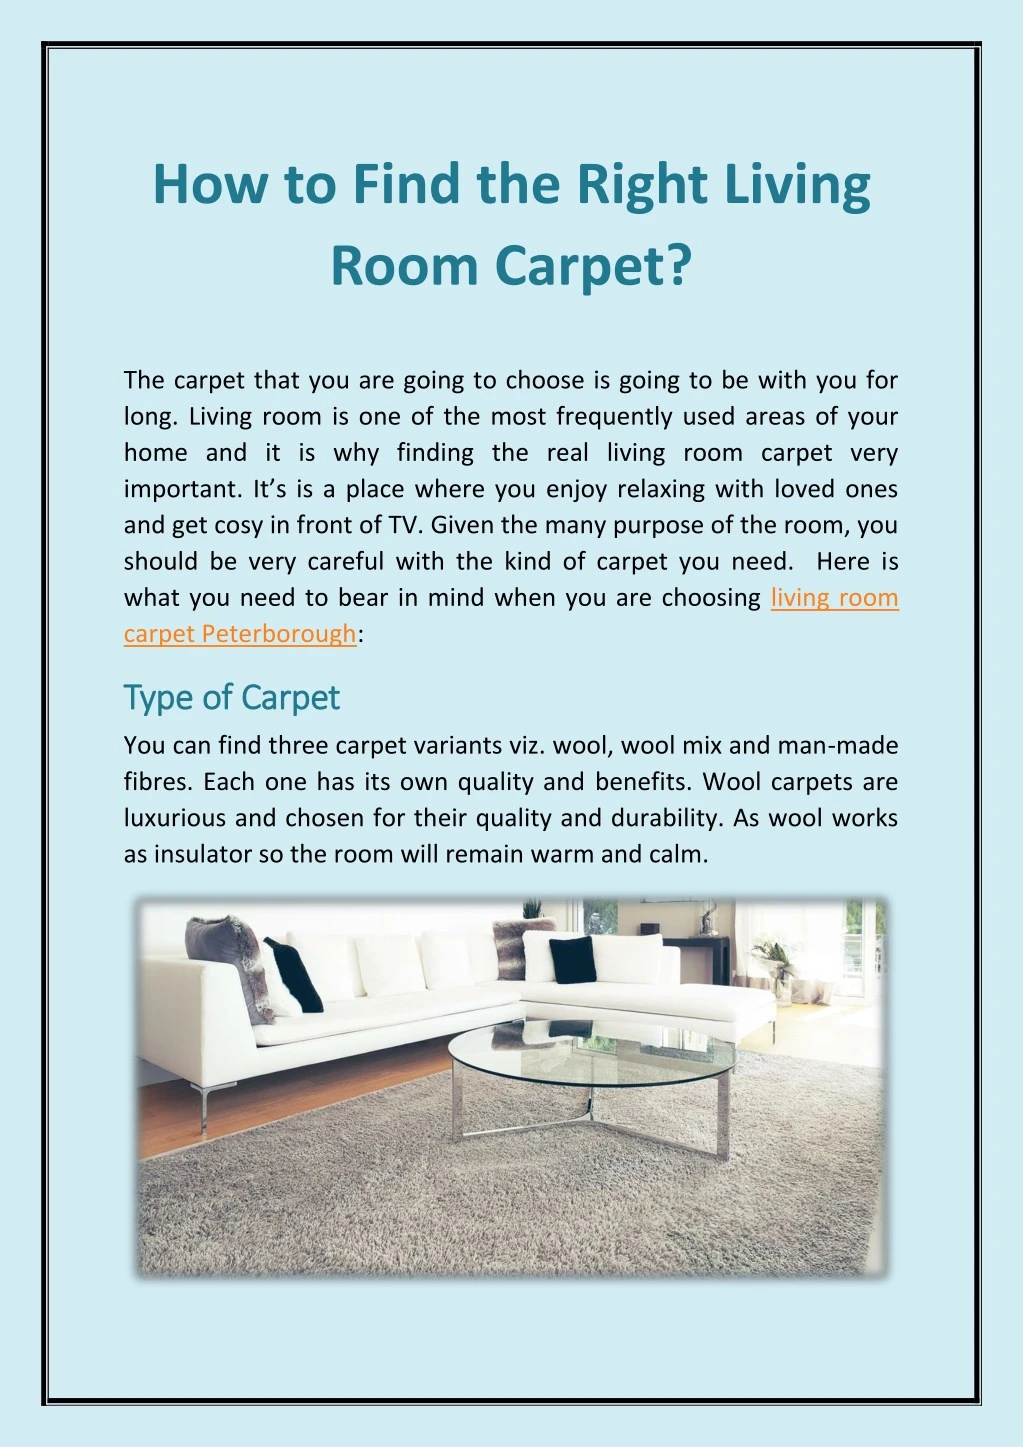 how to find the right living room carpet